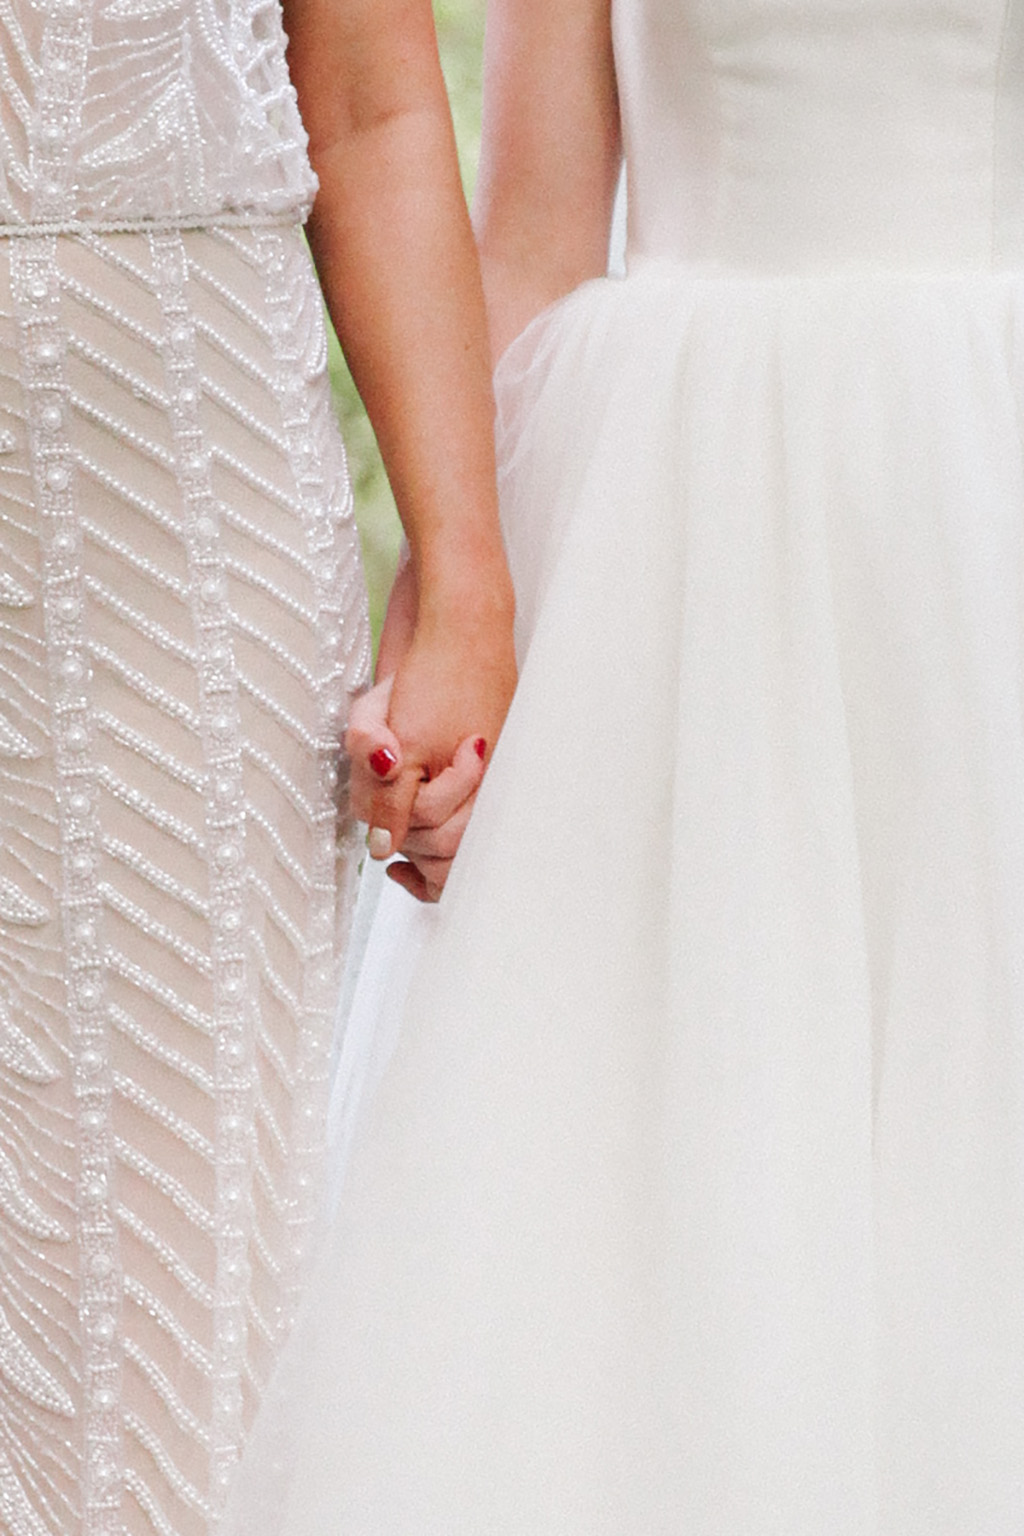 Maureen McCarty & Mollie Connell | Leah Moyers Photography | M&Mdetails183573